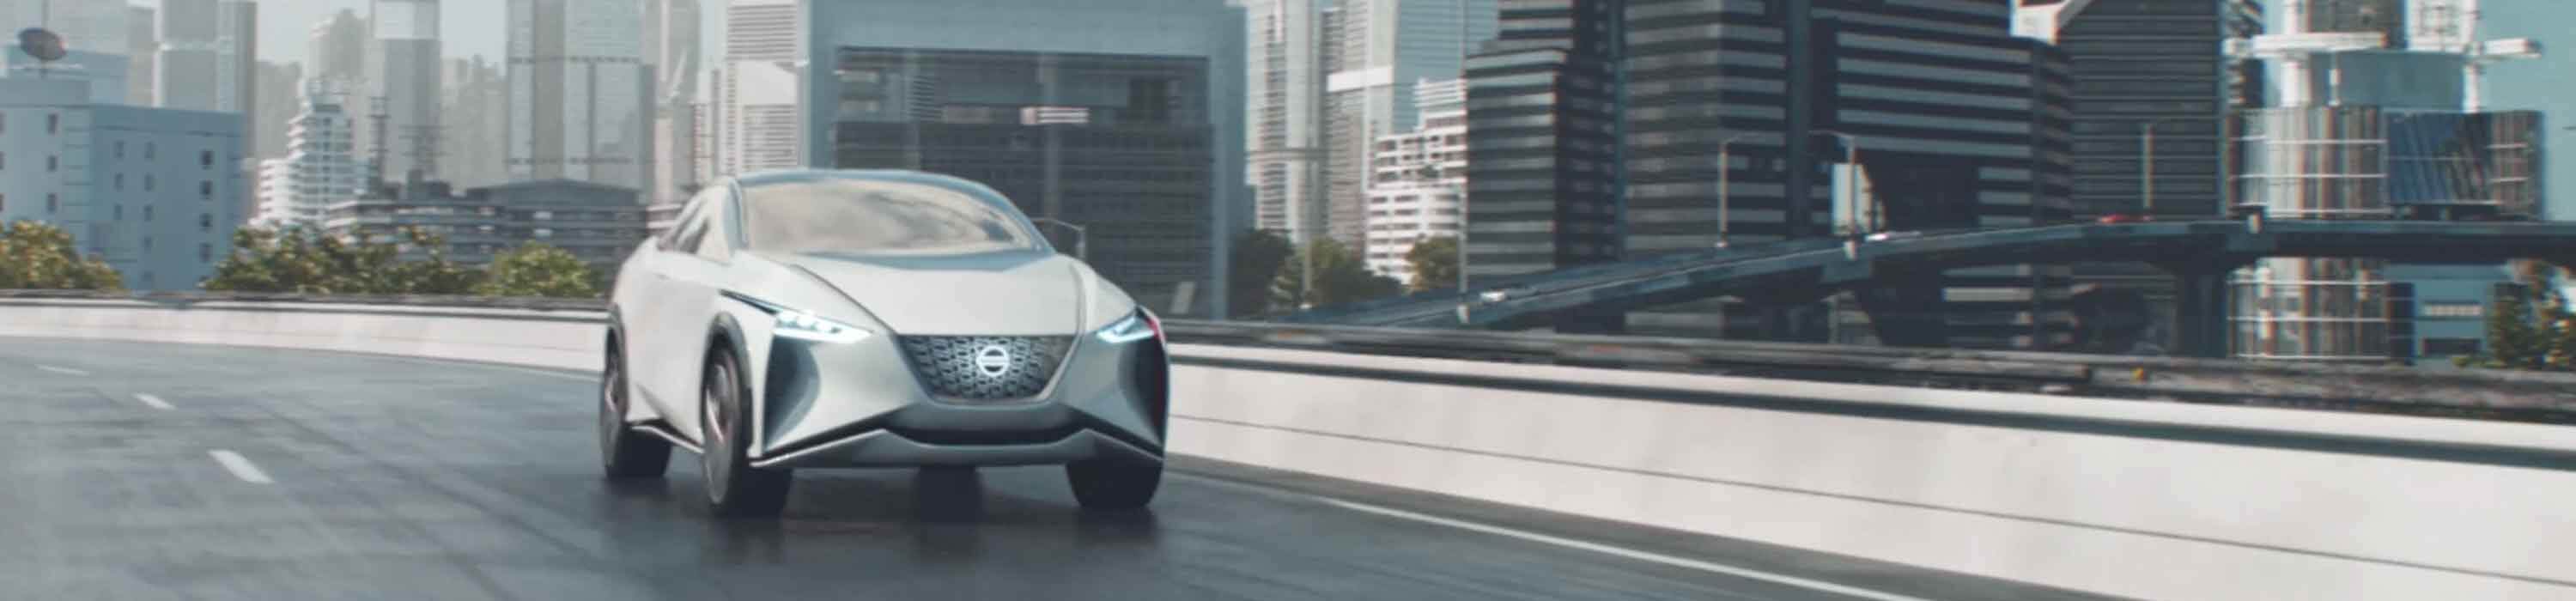 Nissan Mobility